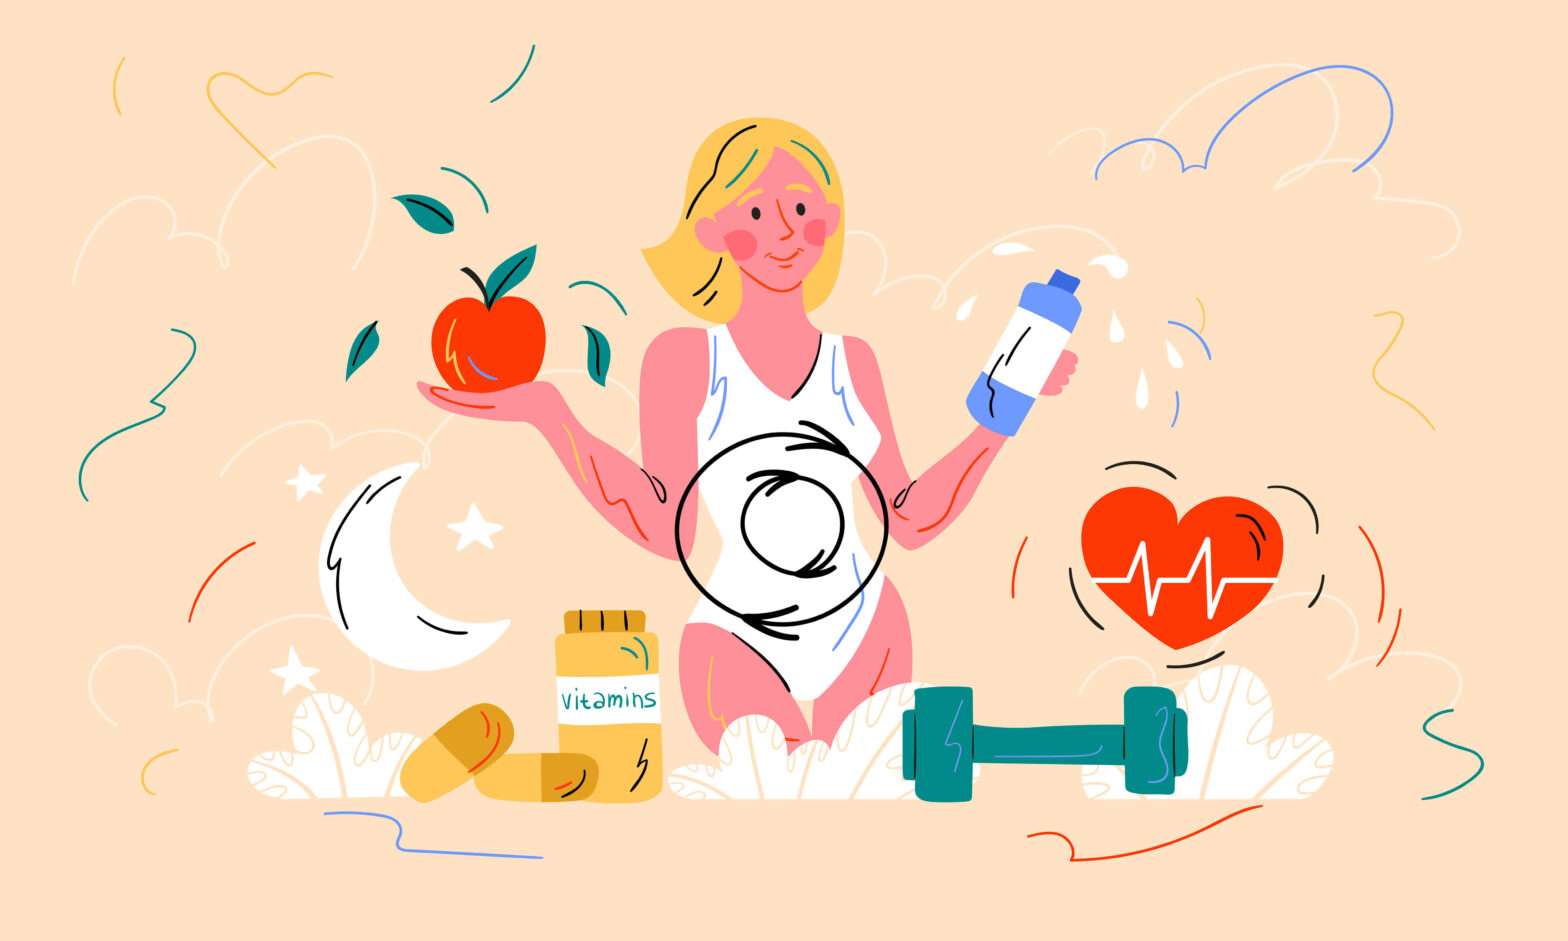 Healthy diet and metabolism concept illustration with a young woman holding a bottle of water and tomato